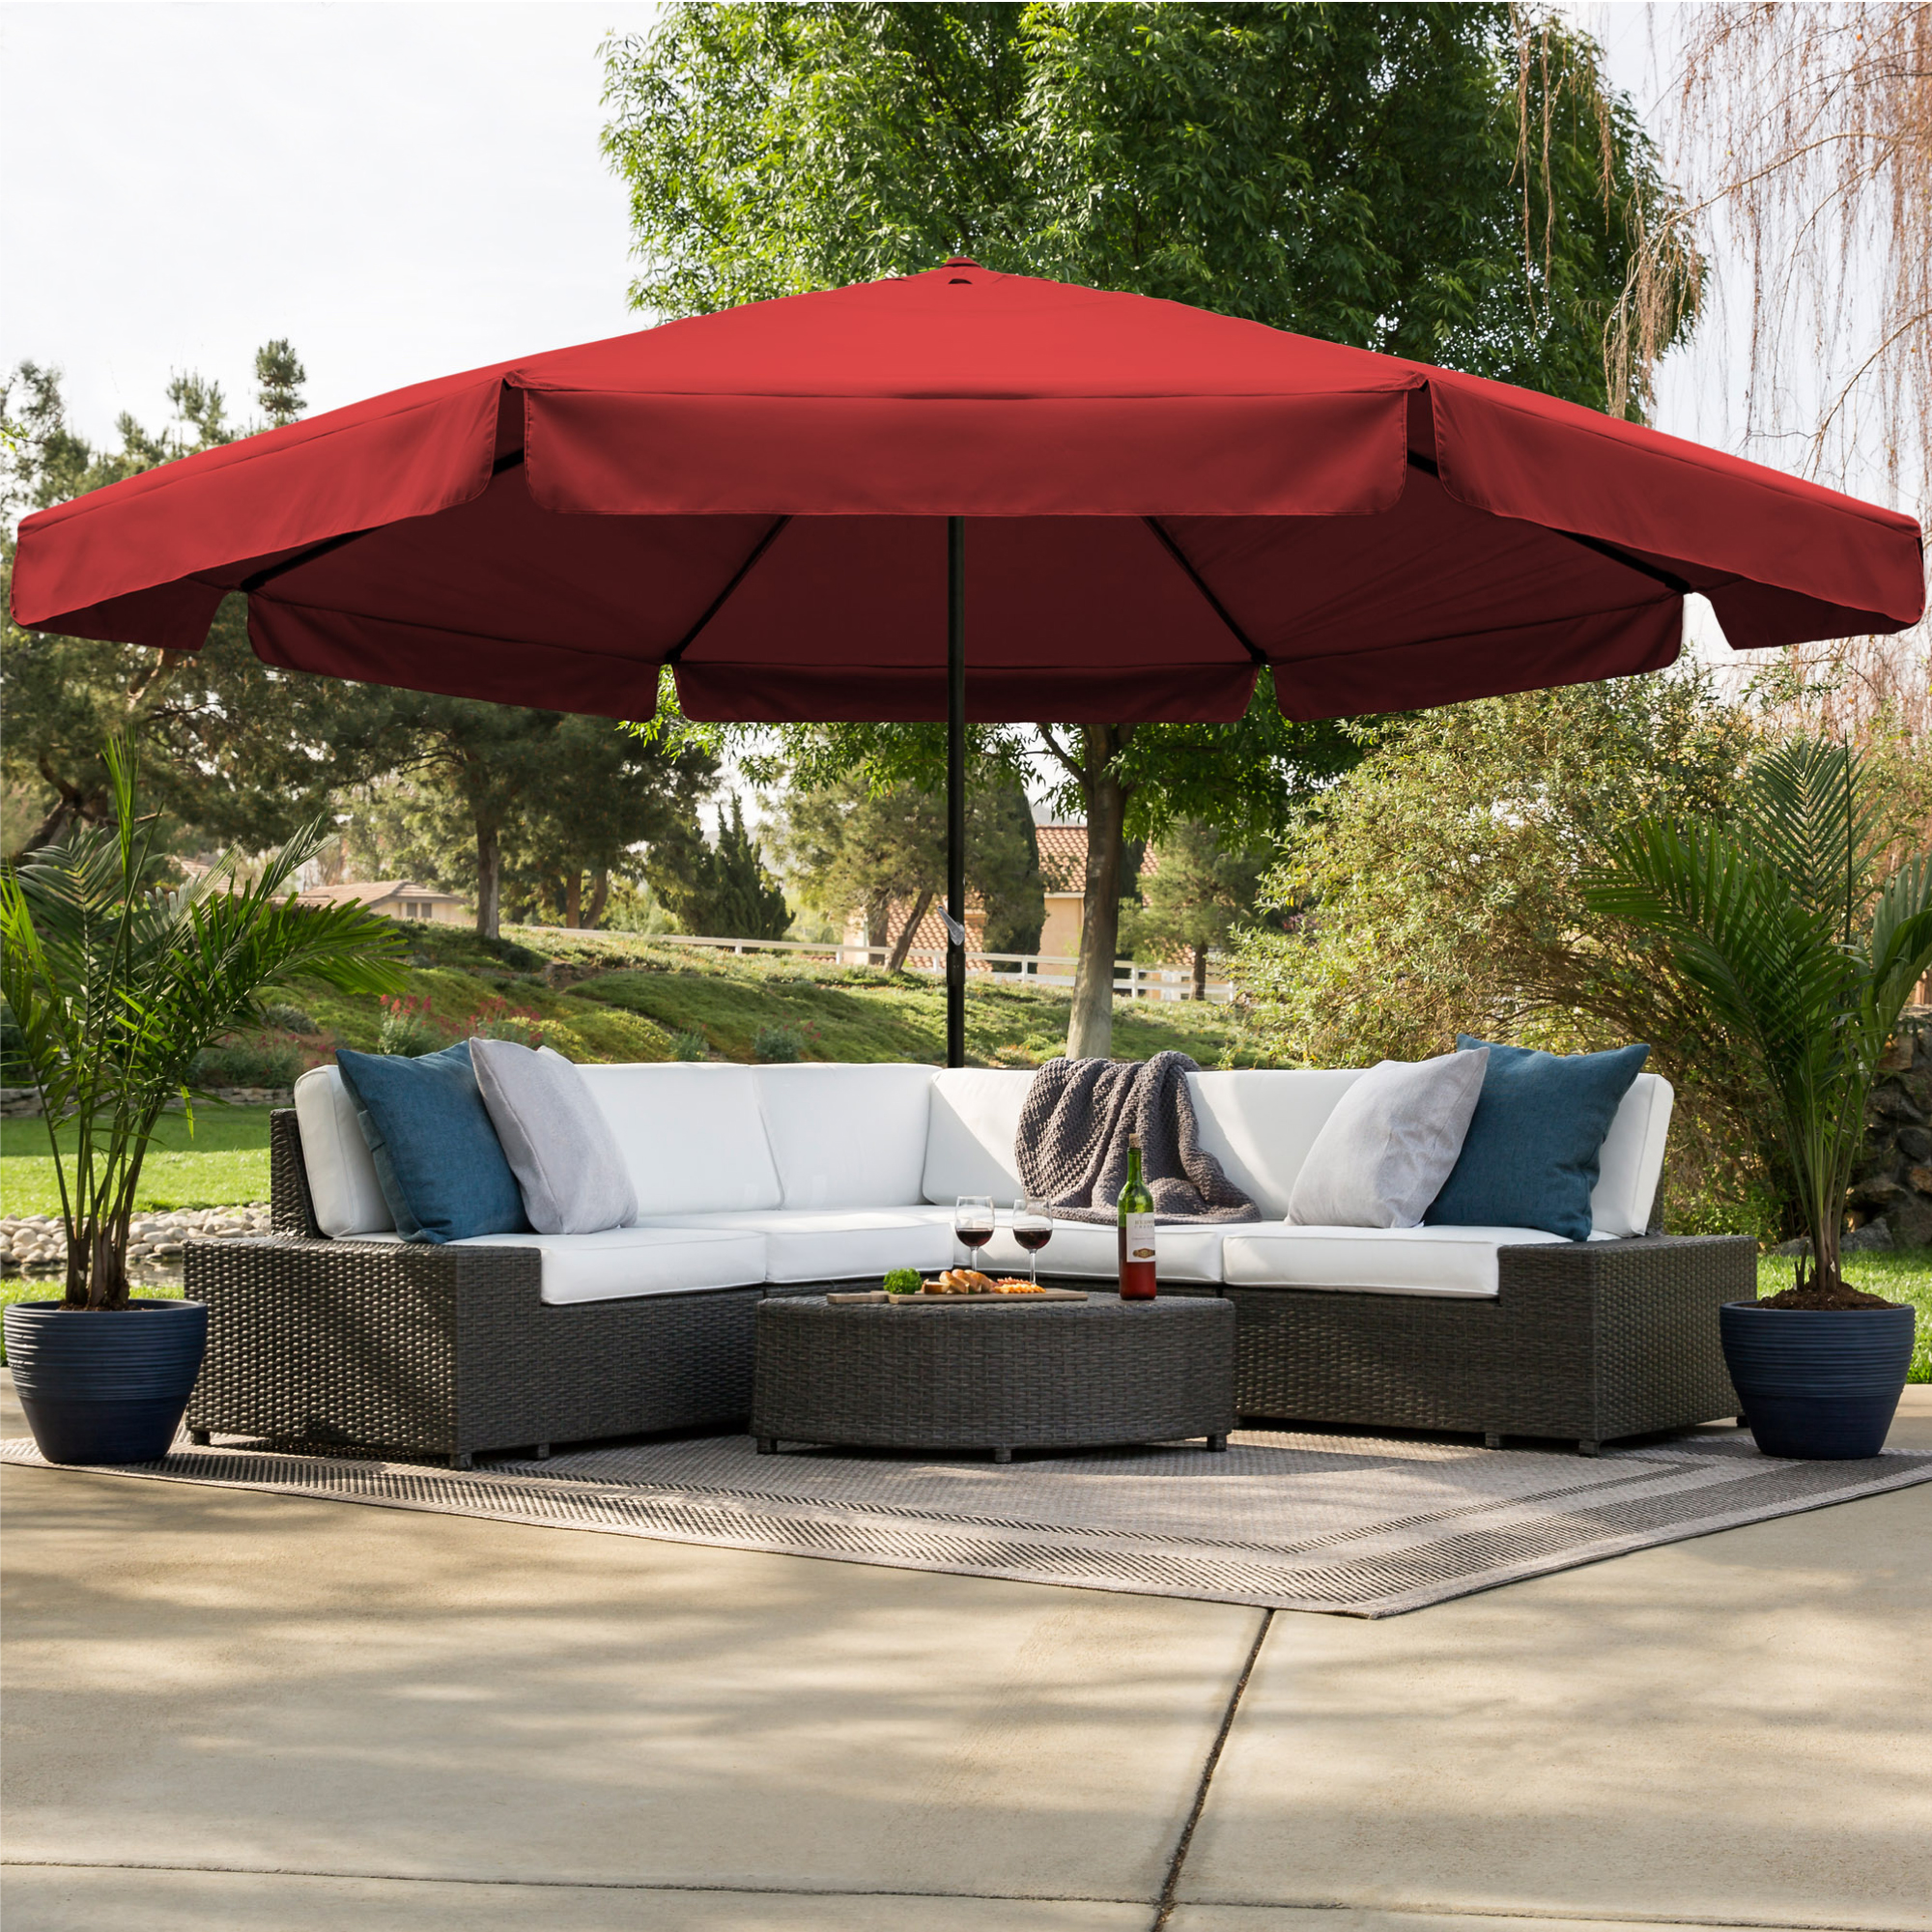 Best Choice Products 16ft Extra-Large Outdoor Patio Market Umbrella with Cross Base, Crank Handle, Air Vent